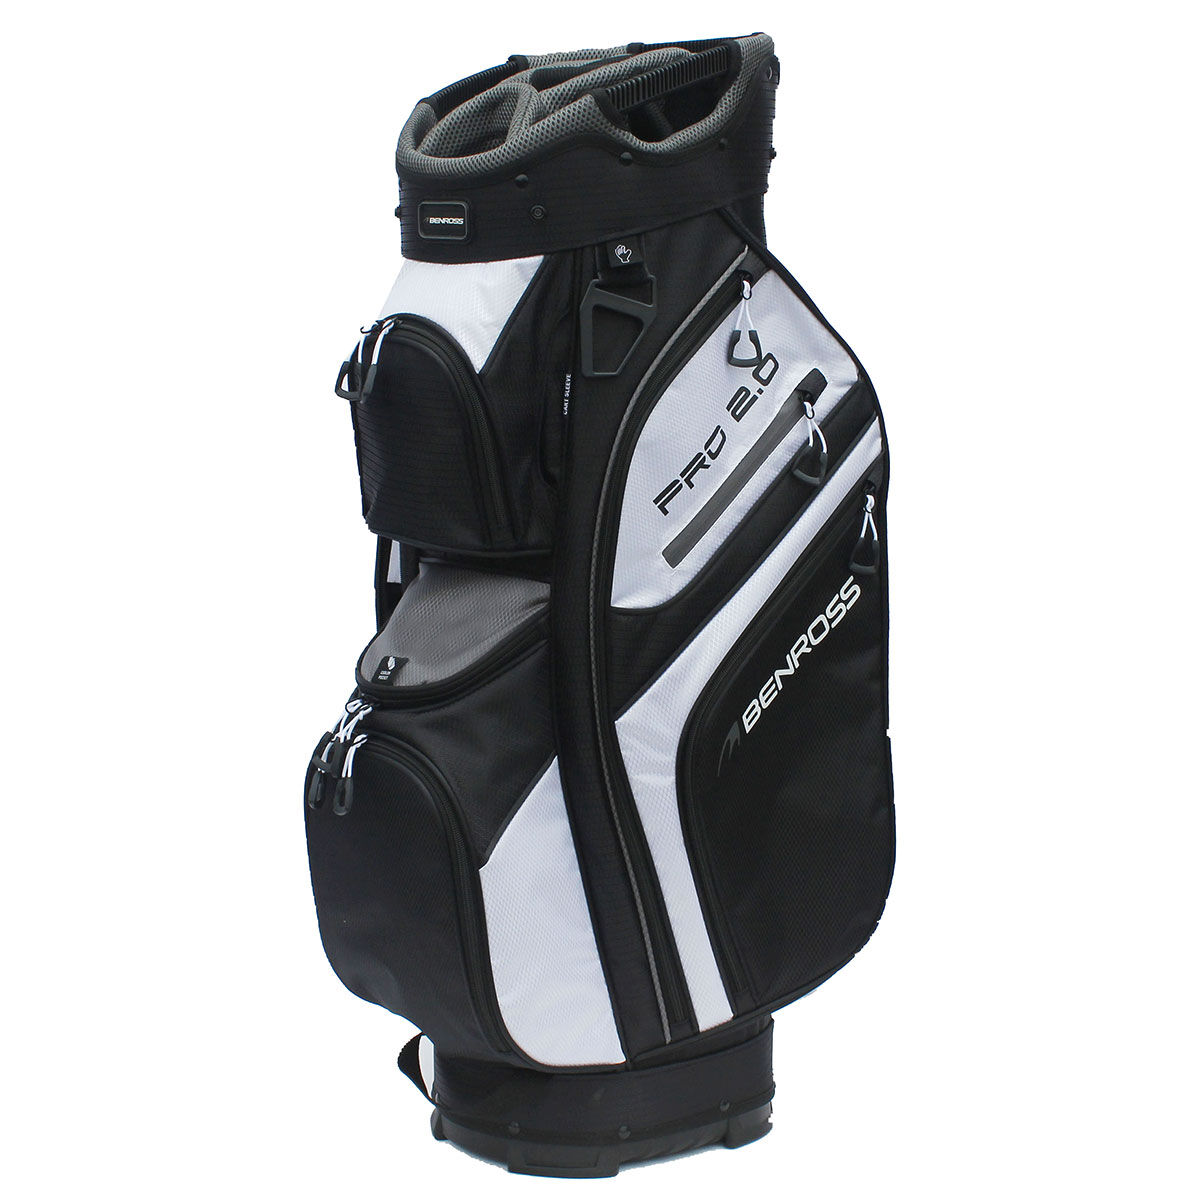 Benross PROTEC 2.0 Deluxe Golf Cart Bag, Black/white/grey, One Size | American Golf